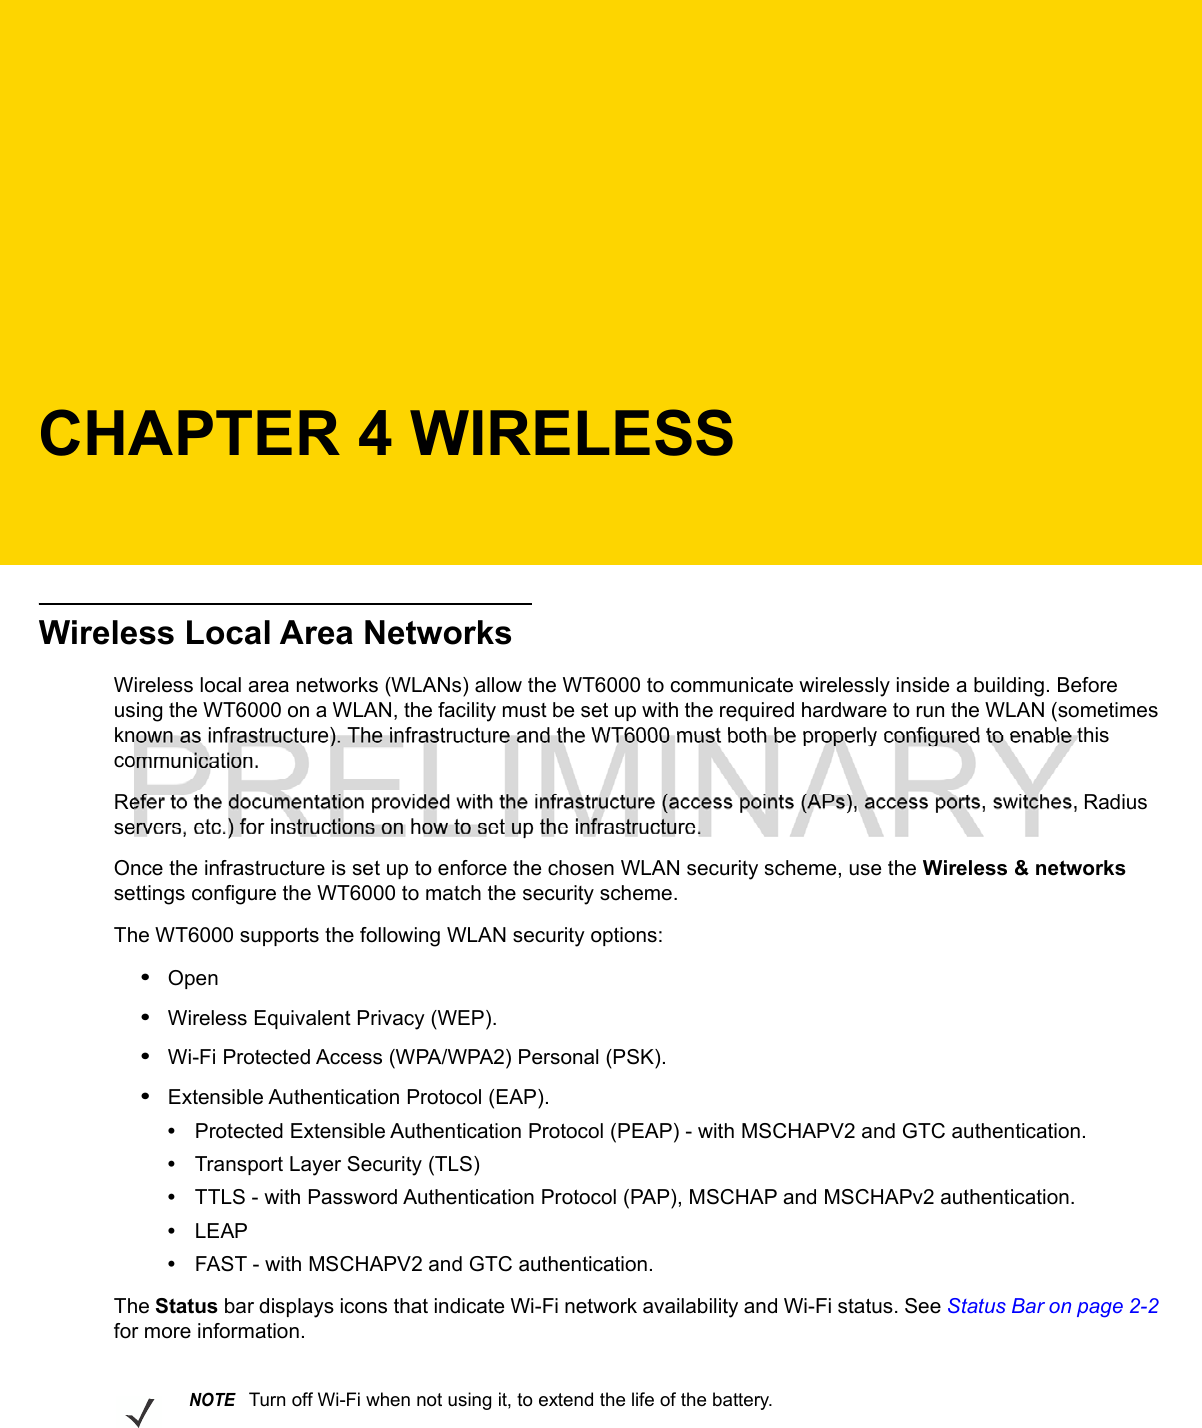 CHAPTER 4 WIRELESSWireless Local Area NetworksWireless local area networks (WLANs) allow the WT6000 to communicate wirelessly inside a building. Before using the WT6000 on a WLAN, the facility must be set up with the required hardware to run the WLAN (sometimes known as infrastructure). The infrastructure and the WT6000 must both be properly configured to enable this communication.Refer to the documentation provided with the infrastructure (access points (APs), access ports, switches, Radius servers, etc.) for instructions on how to set up the infrastructure.Once the infrastructure is set up to enforce the chosen WLAN security scheme, use the Wireless &amp; networks settings configure the WT6000 to match the security scheme.The WT6000 supports the following WLAN security options:•Open•Wireless Equivalent Privacy (WEP).•Wi-Fi Protected Access (WPA/WPA2) Personal (PSK).•Extensible Authentication Protocol (EAP).•Protected Extensible Authentication Protocol (PEAP) - with MSCHAPV2 and GTC authentication.•Transport Layer Security (TLS)•TTLS - with Password Authentication Protocol (PAP), MSCHAP and MSCHAPv2 authentication.•LEAP•FAST - with MSCHAPV2 and GTC authentication.The Status bar displays icons that indicate Wi-Fi network availability and Wi-Fi status. See Status Bar on page 2-2 for more information.NOTETurn off Wi-Fi when not using it, to extend the life of the battery.